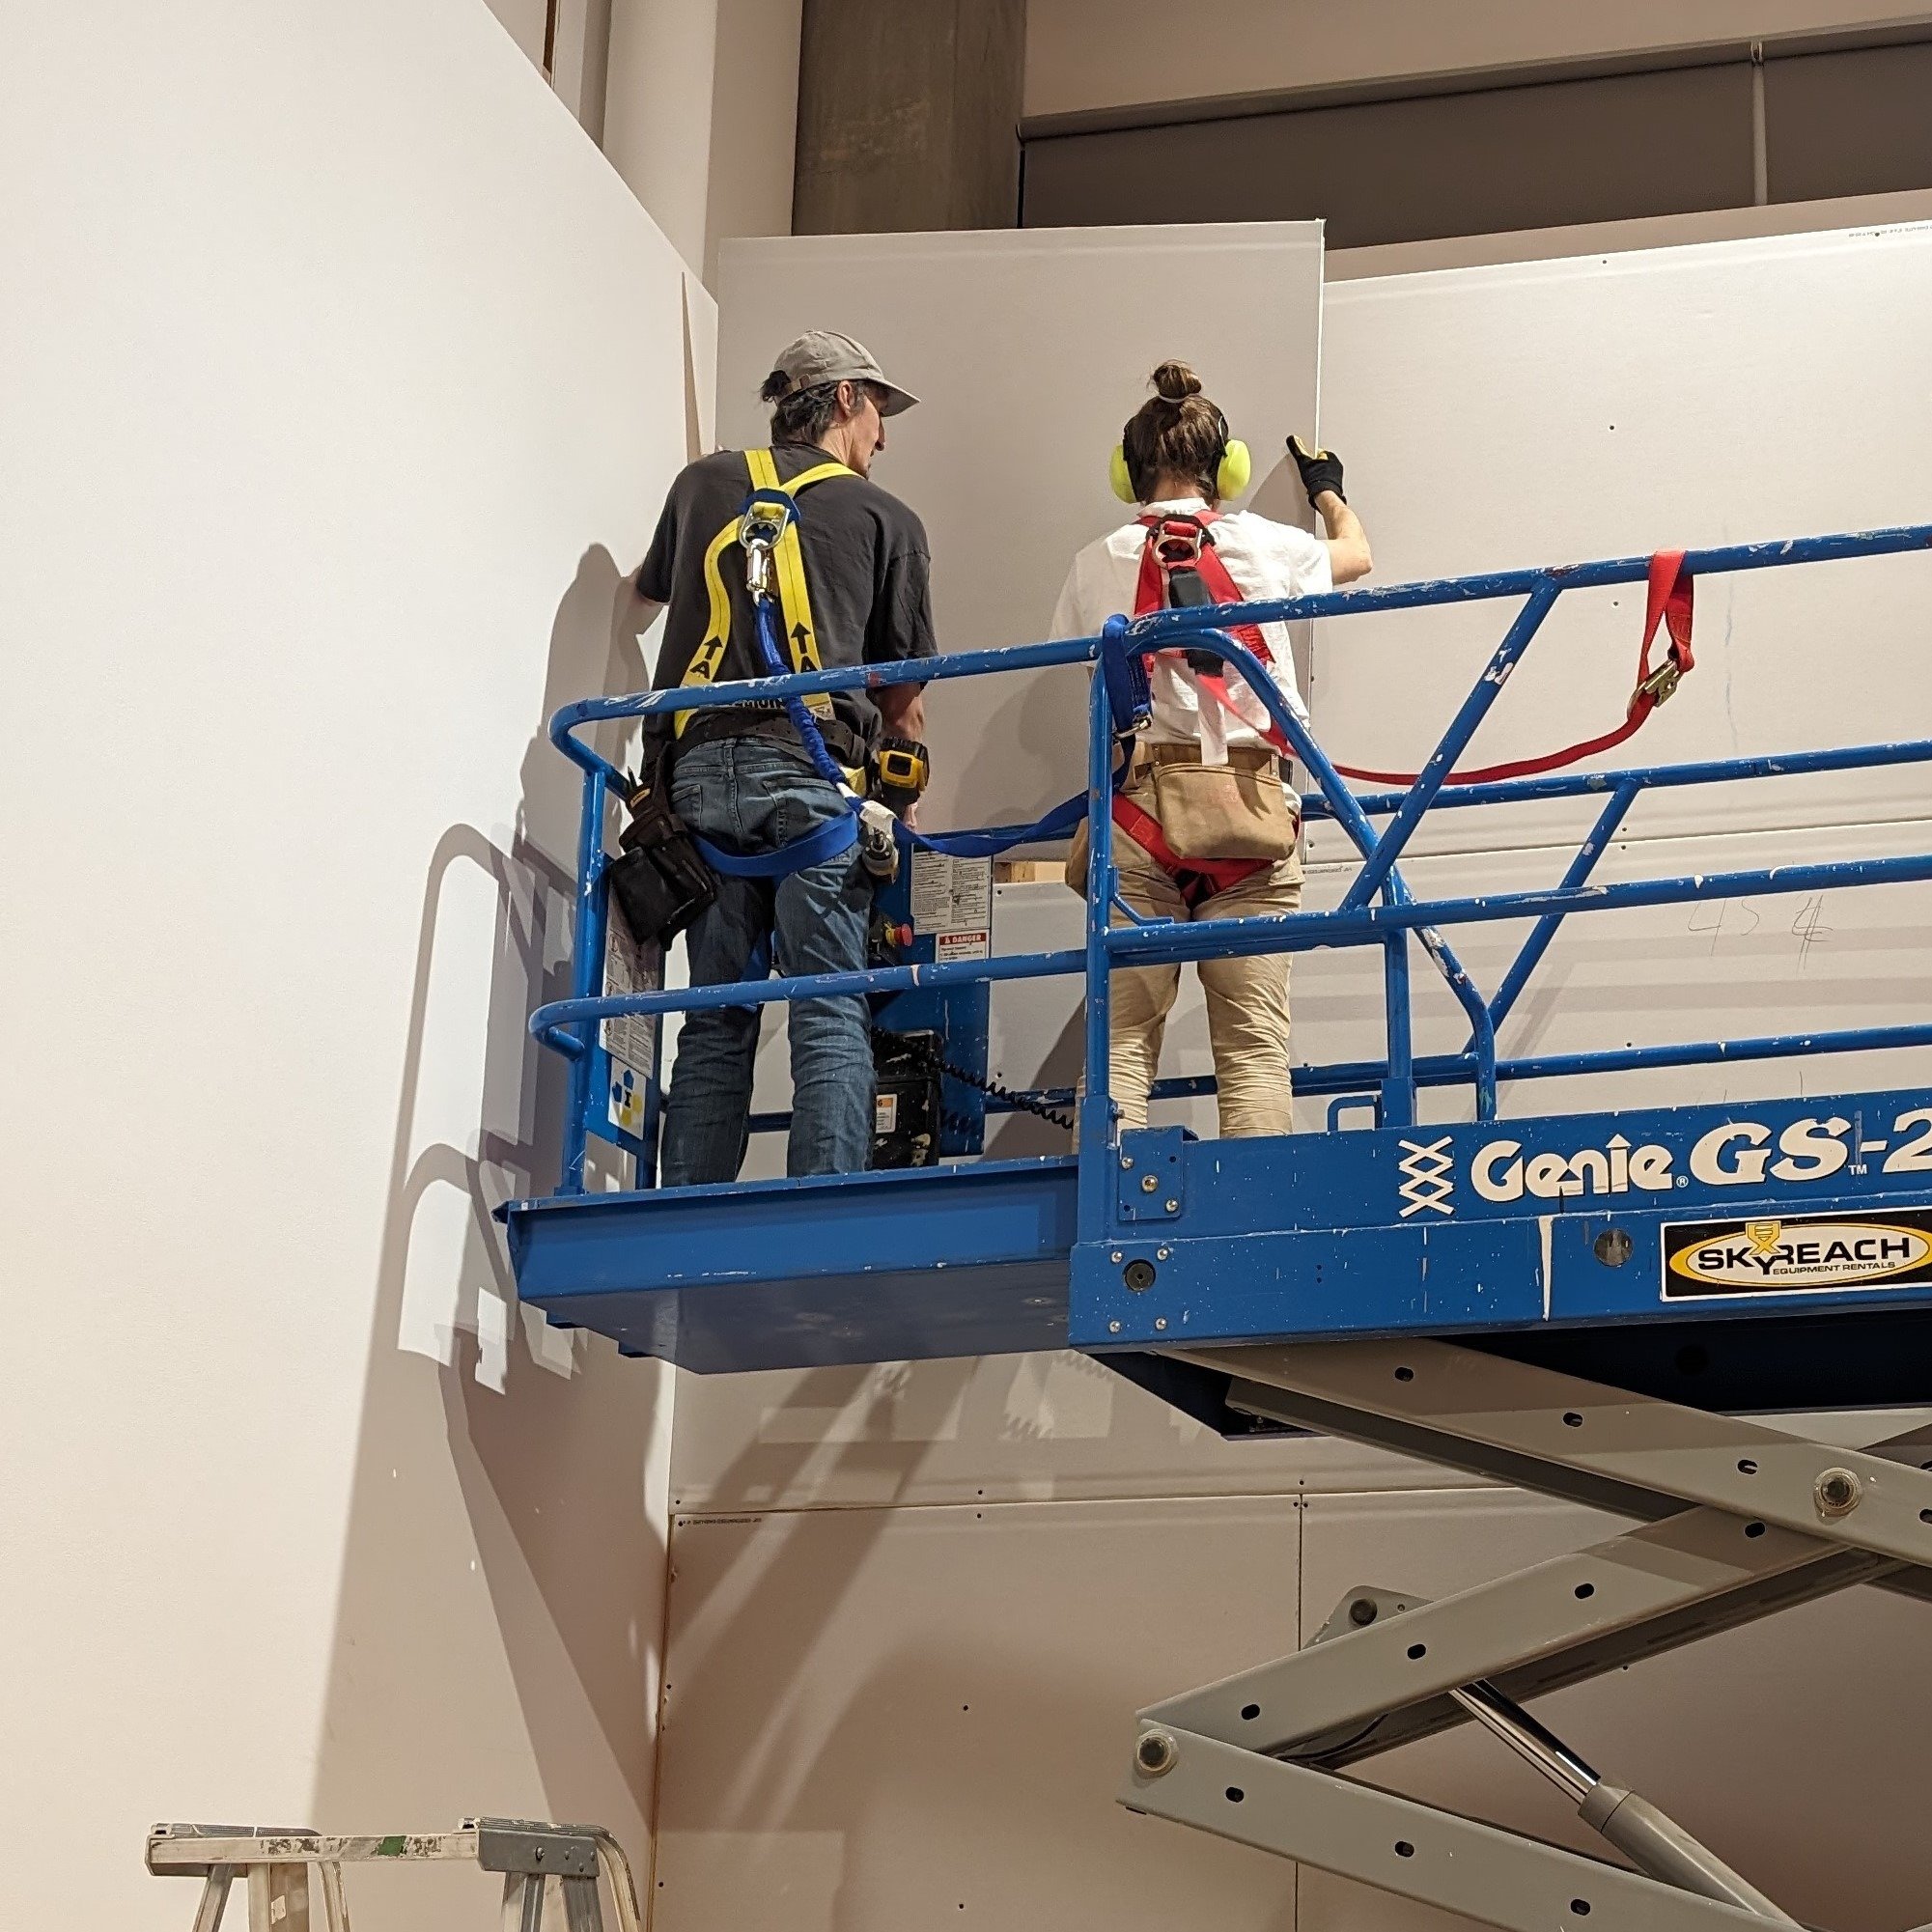 WE ARE HIRING &ndash; INSTALLATION ASSISTANT. 

The Installation Assistant assists with the de-installation and installation of exhibitions for approximately 2 weeks (35 to 40 hours/week) every 3 to 4 months on average (early January, May, September,